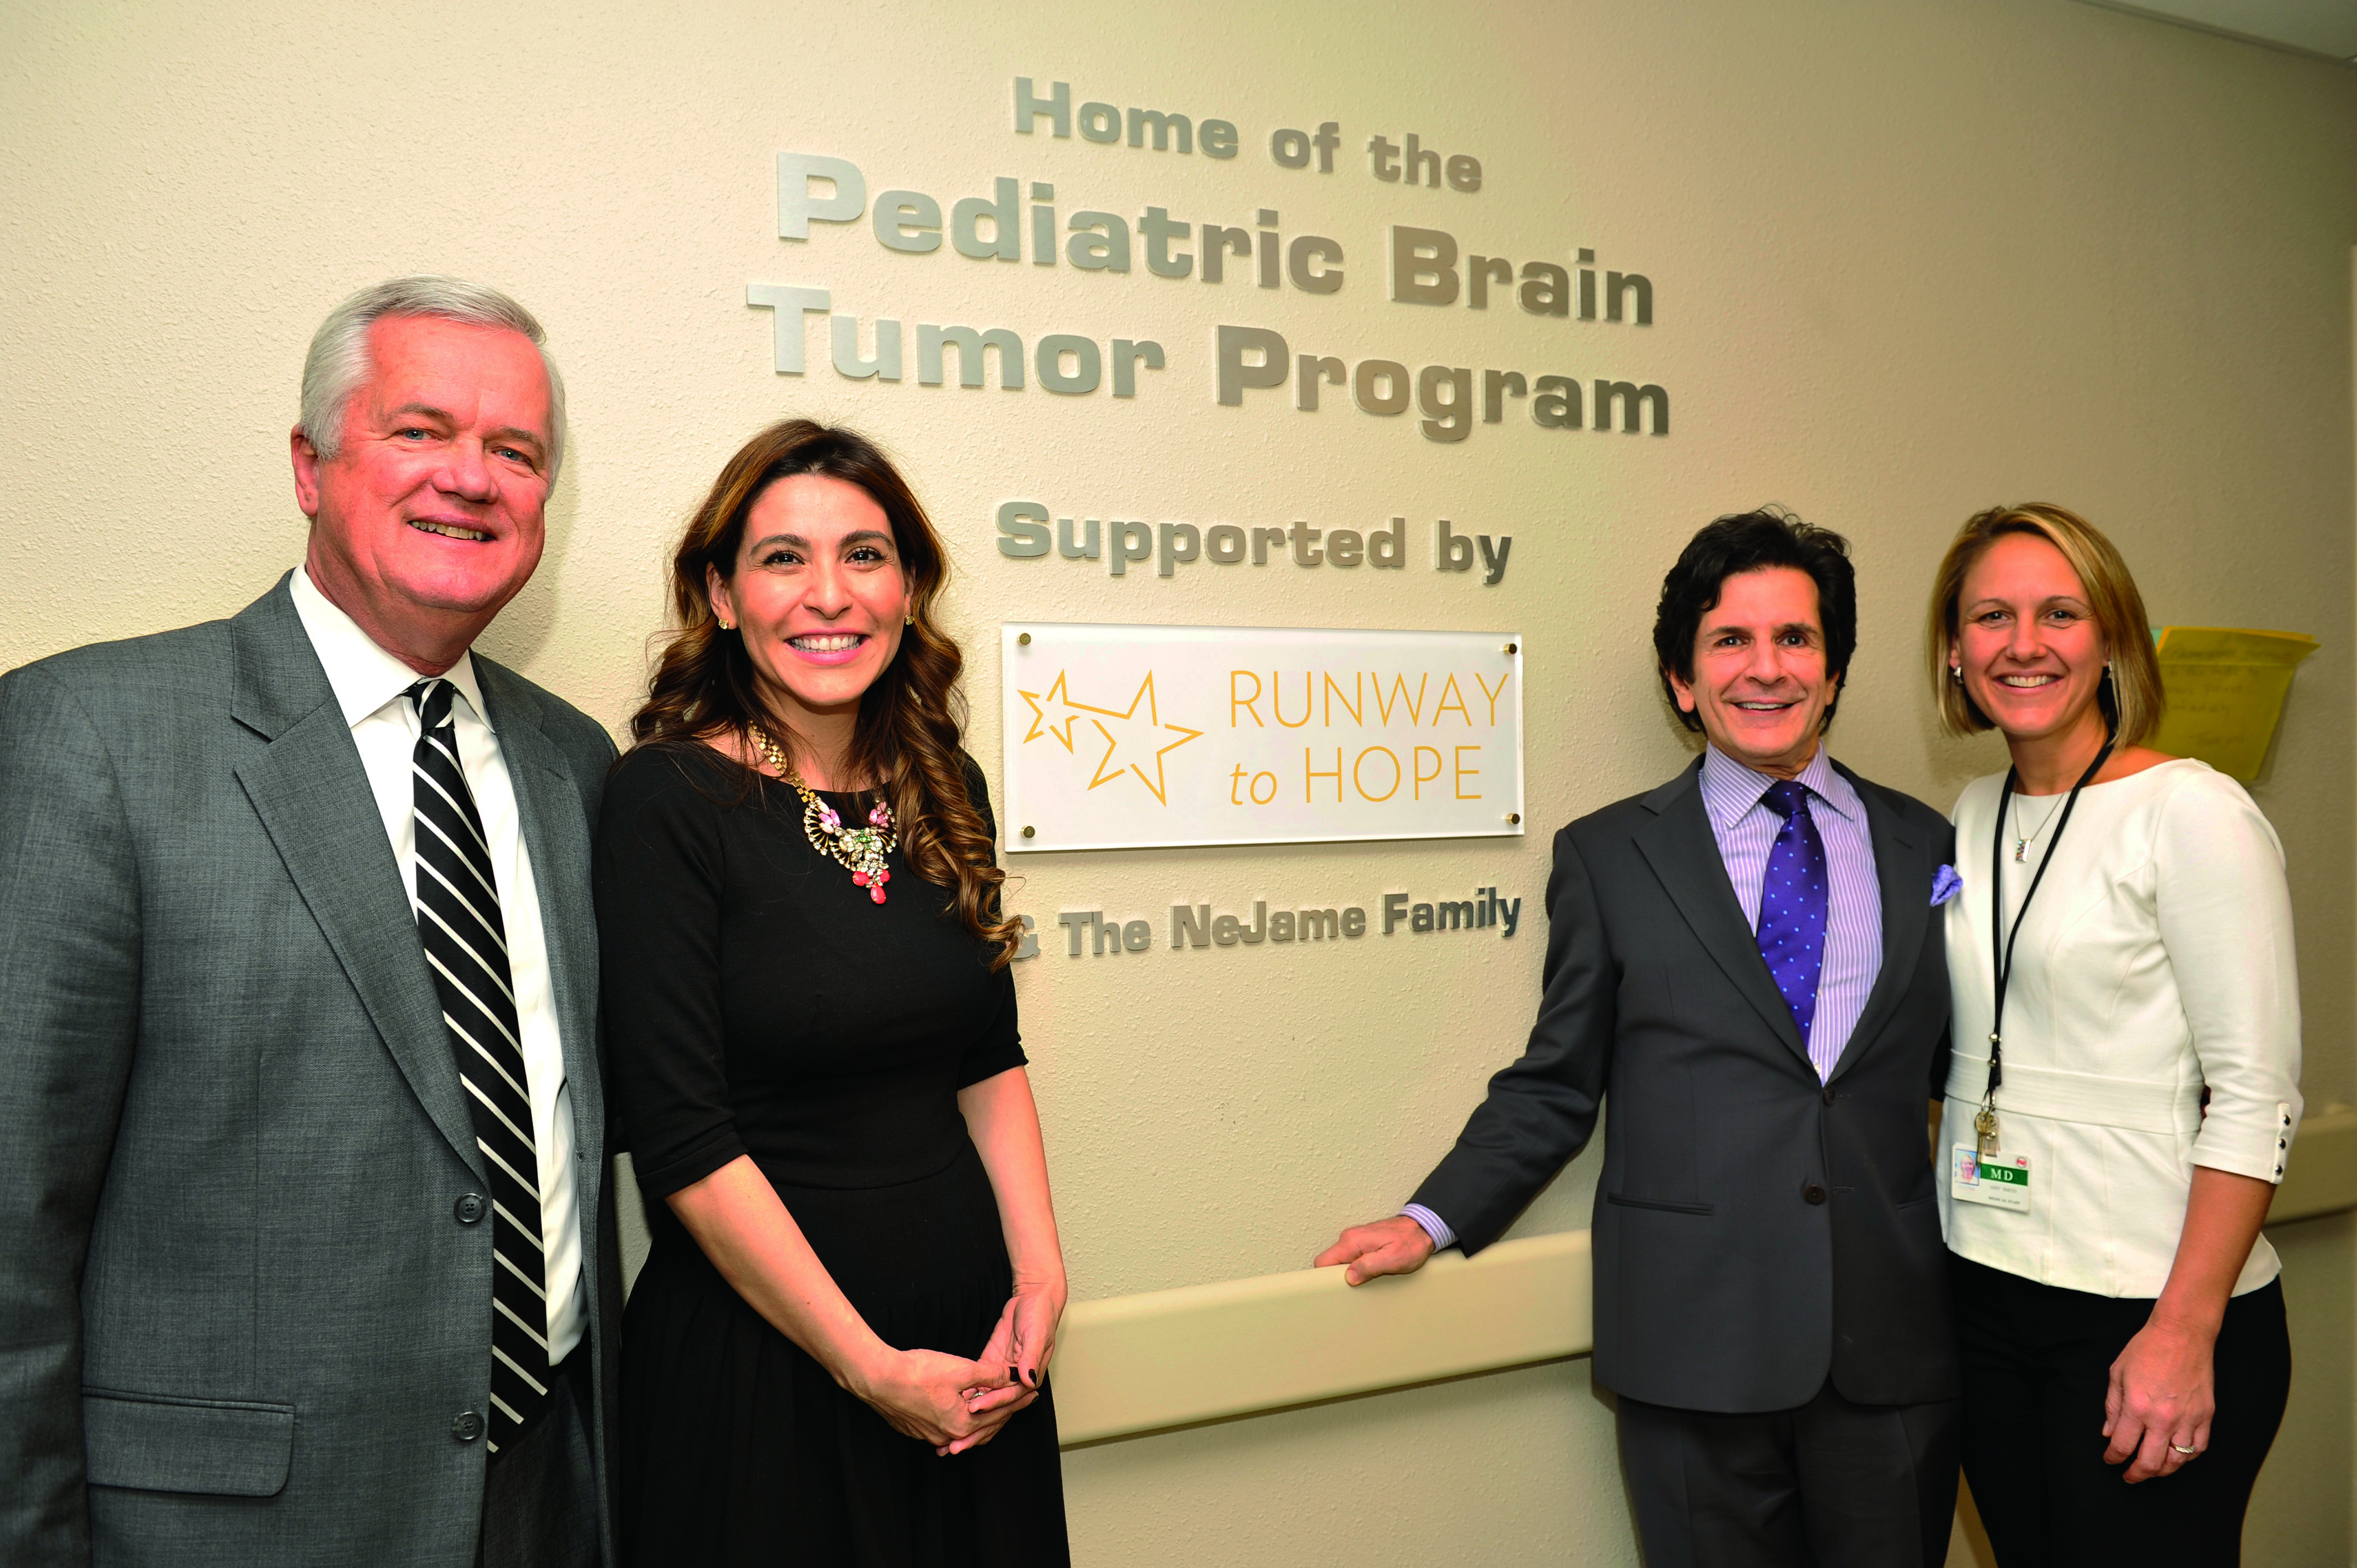 Runway to Hope’s Vision for Pediatric Cancer Care: 10 Years of Impact in Central Florida